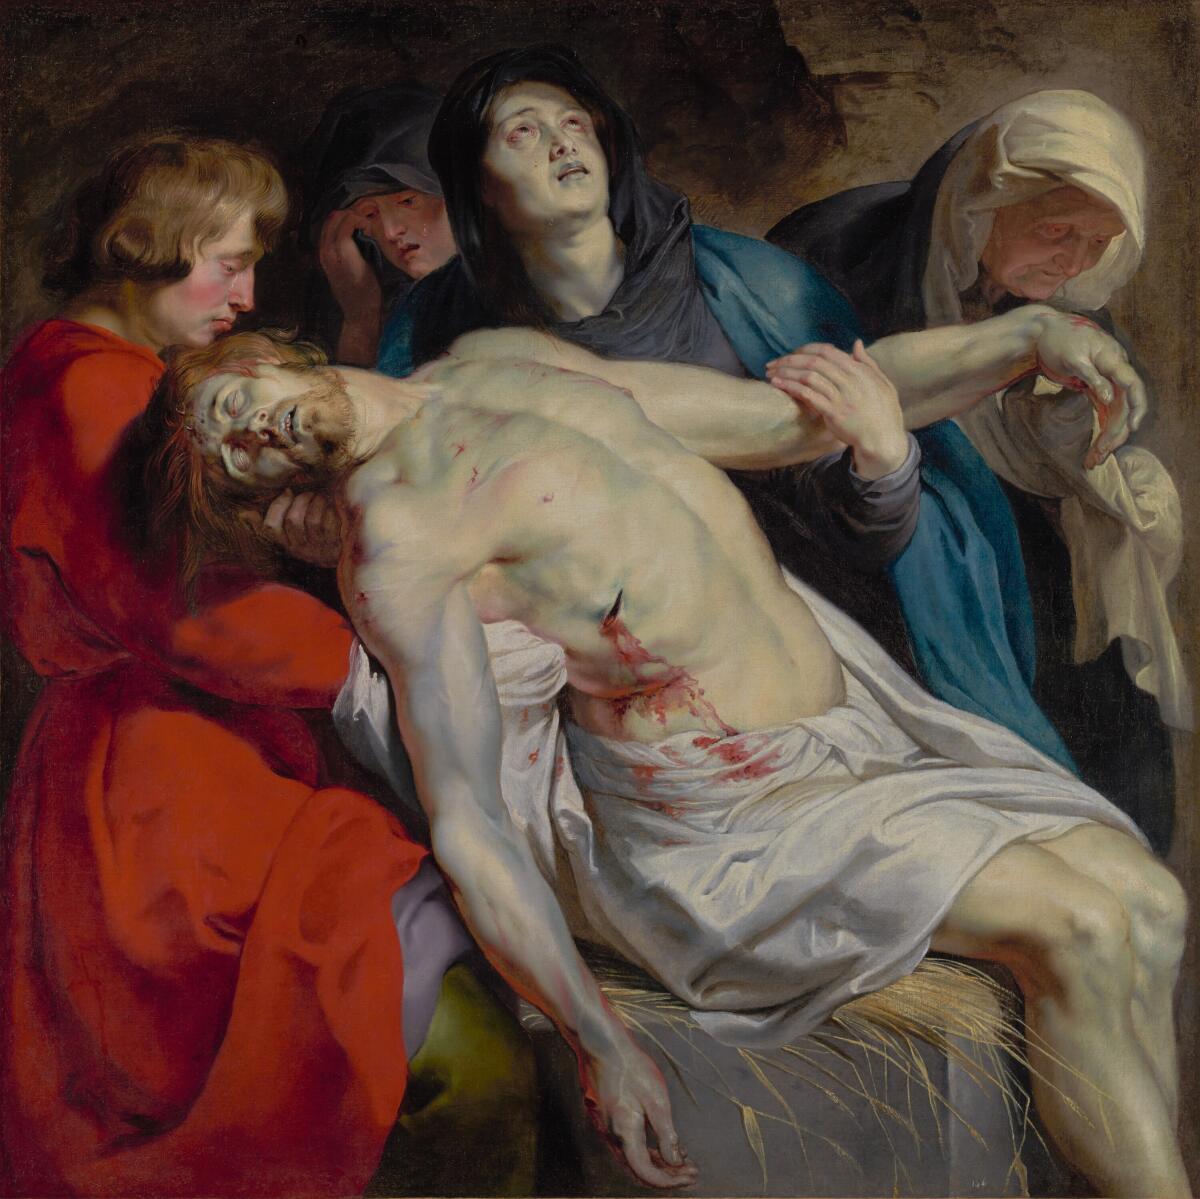 Peter Paul Rubens, “The Entombment,” around 1612, oil on canvas